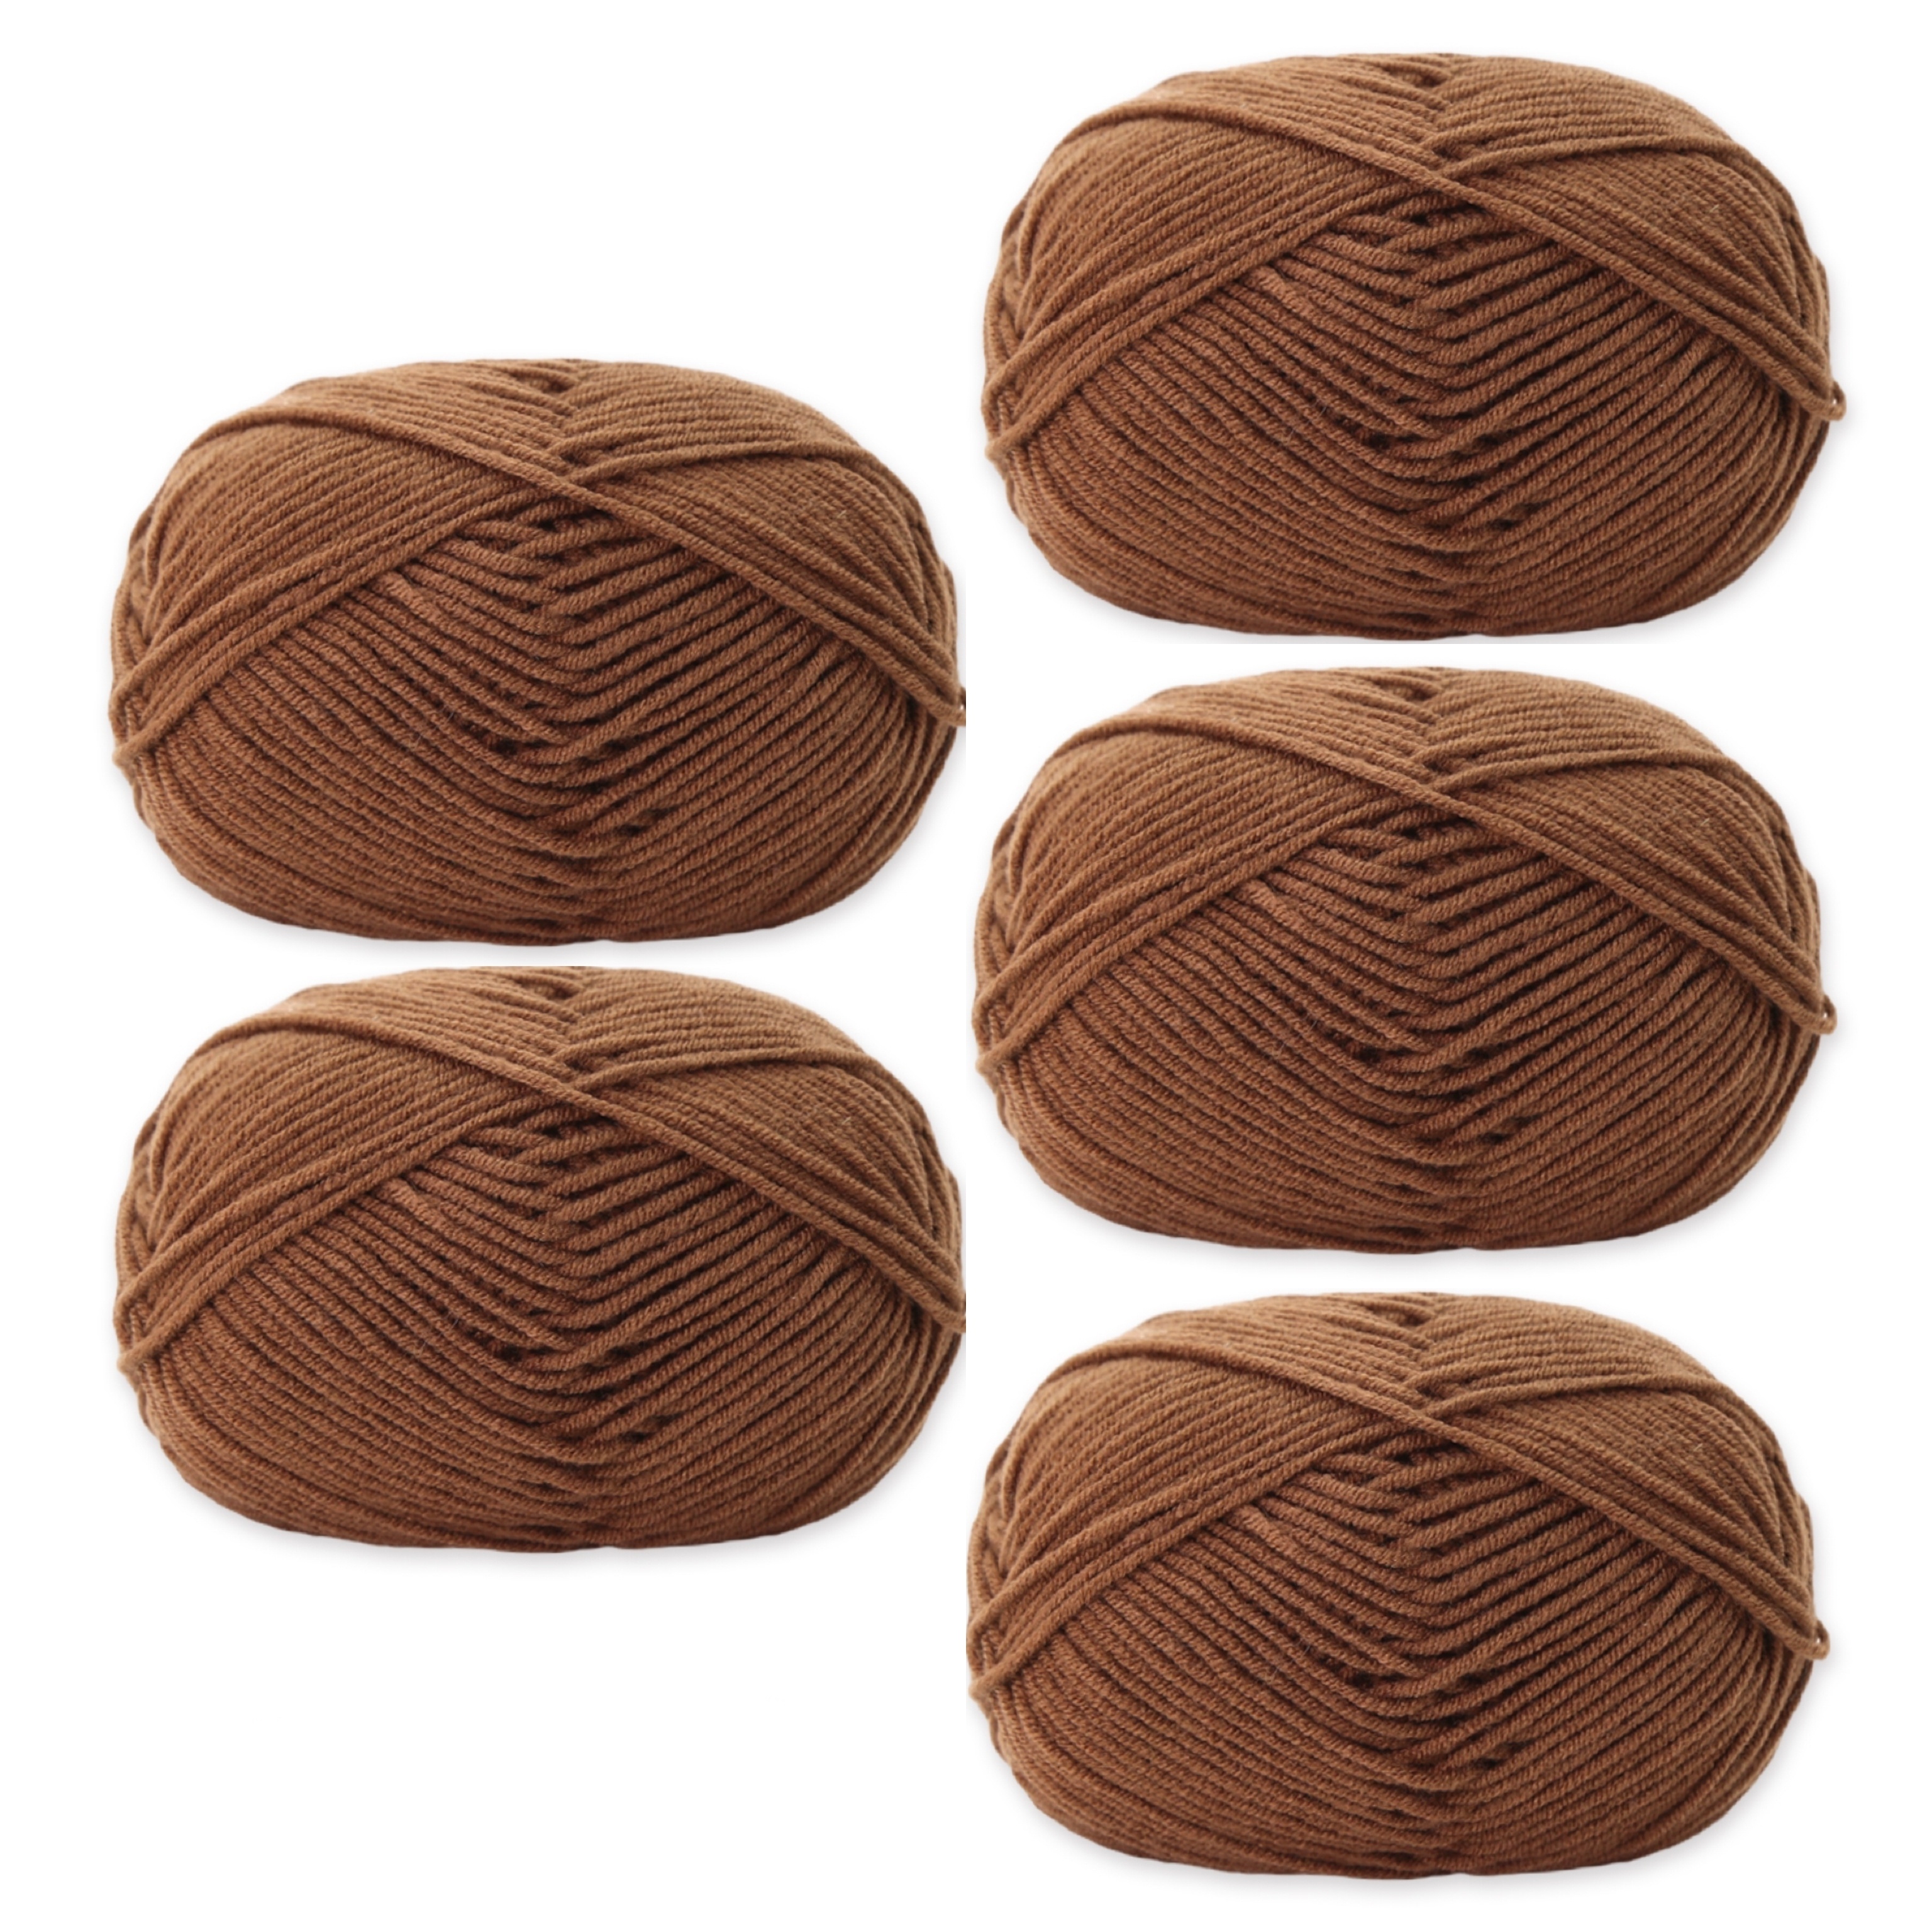 3x50g Beginners Chocolate Brown Yarn, 260 Yards Chocolate Brown Yarn for  Crocheting Knitting, Easy-to-See Stitches, Worsted Medium #4, Chunky Thick